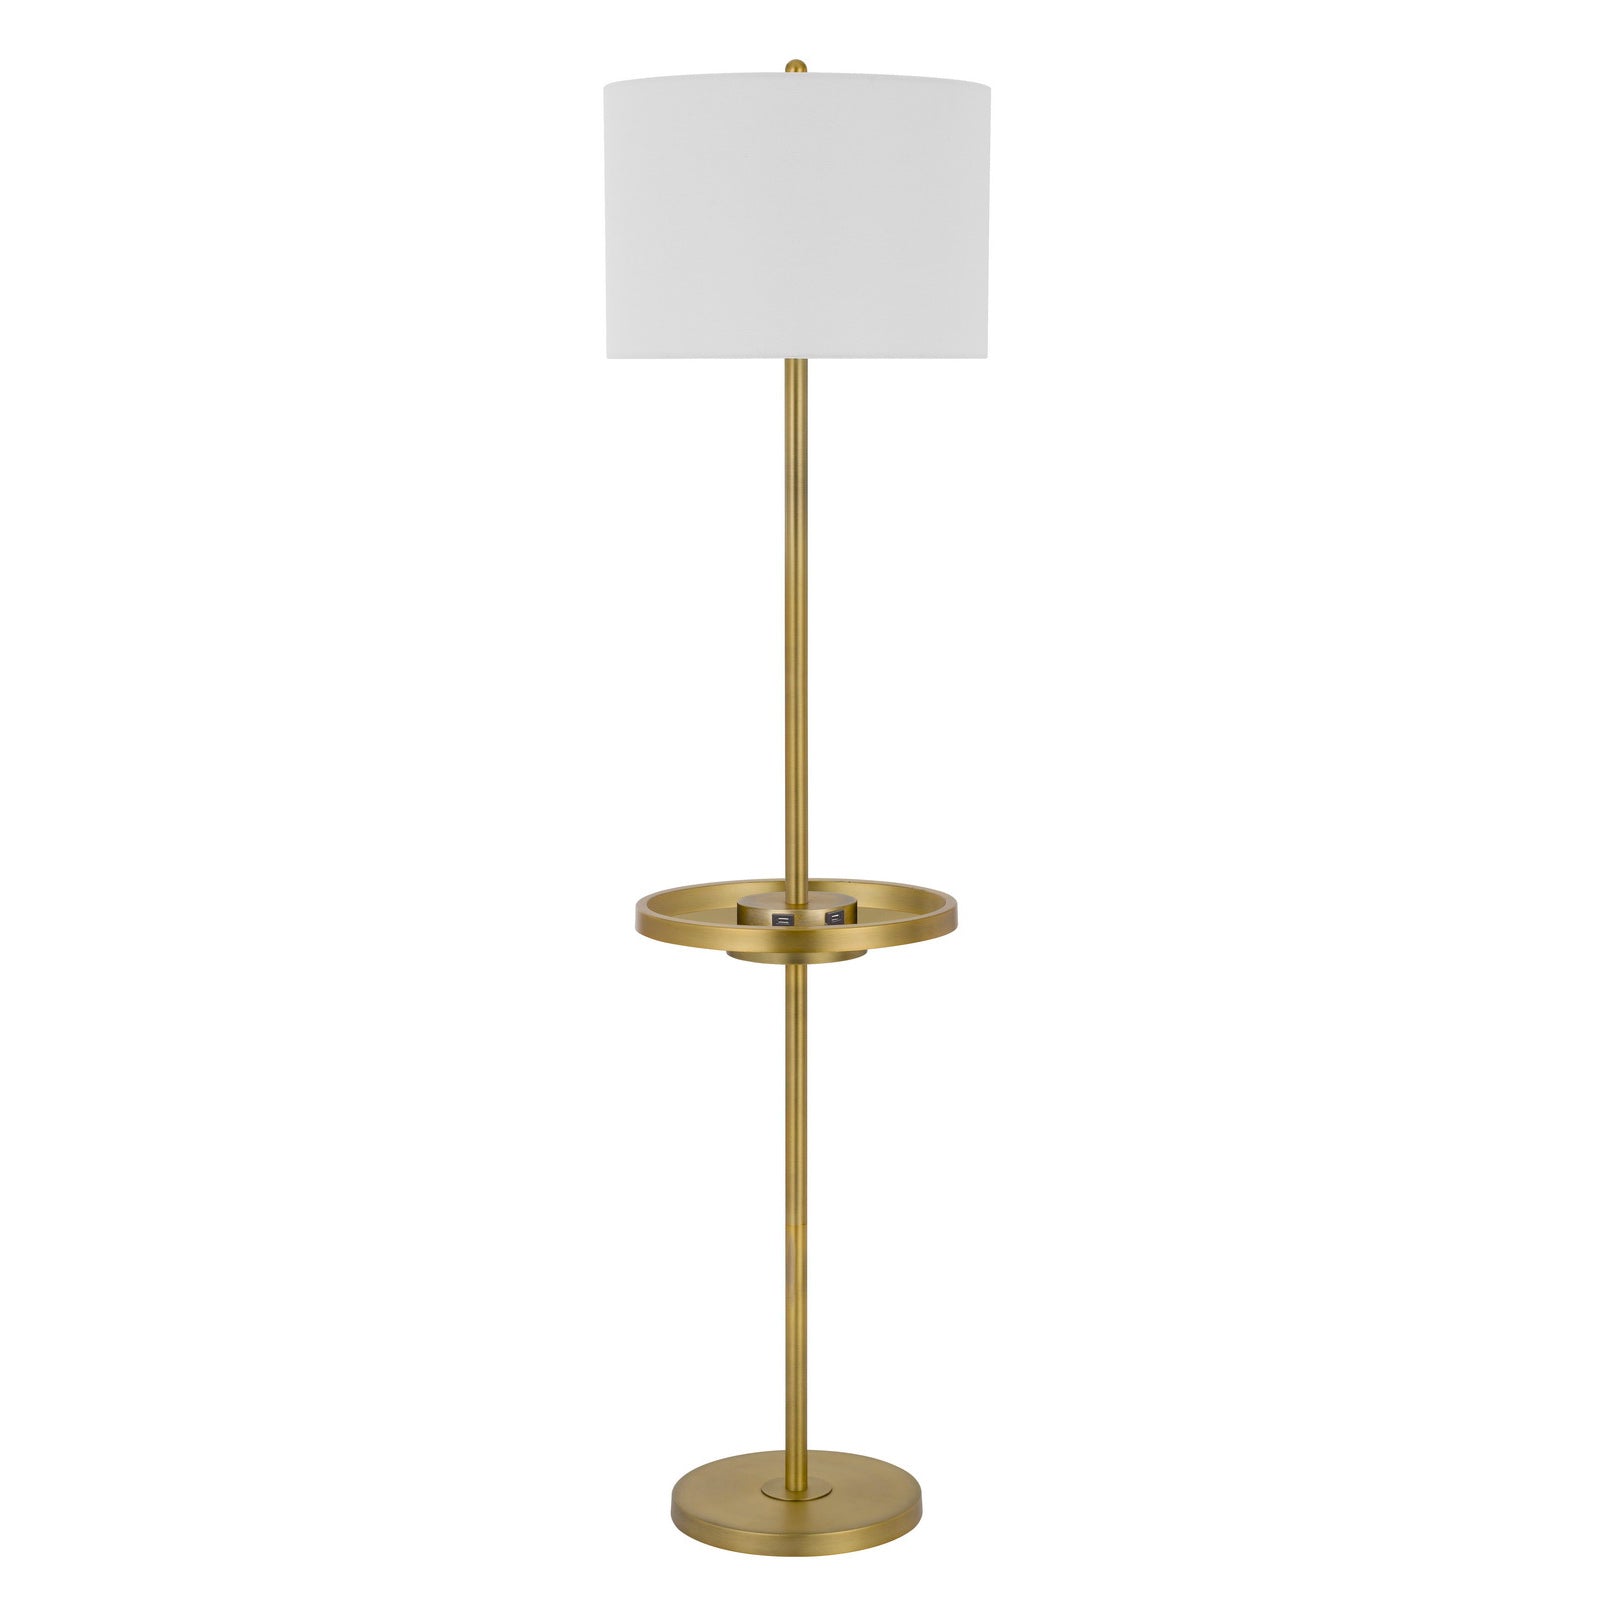 150W 3 Way Crofton Metal Floor Lamp With Centered Metal Tray Table With 2 Usb Charging Ports And Weighted Metal Base